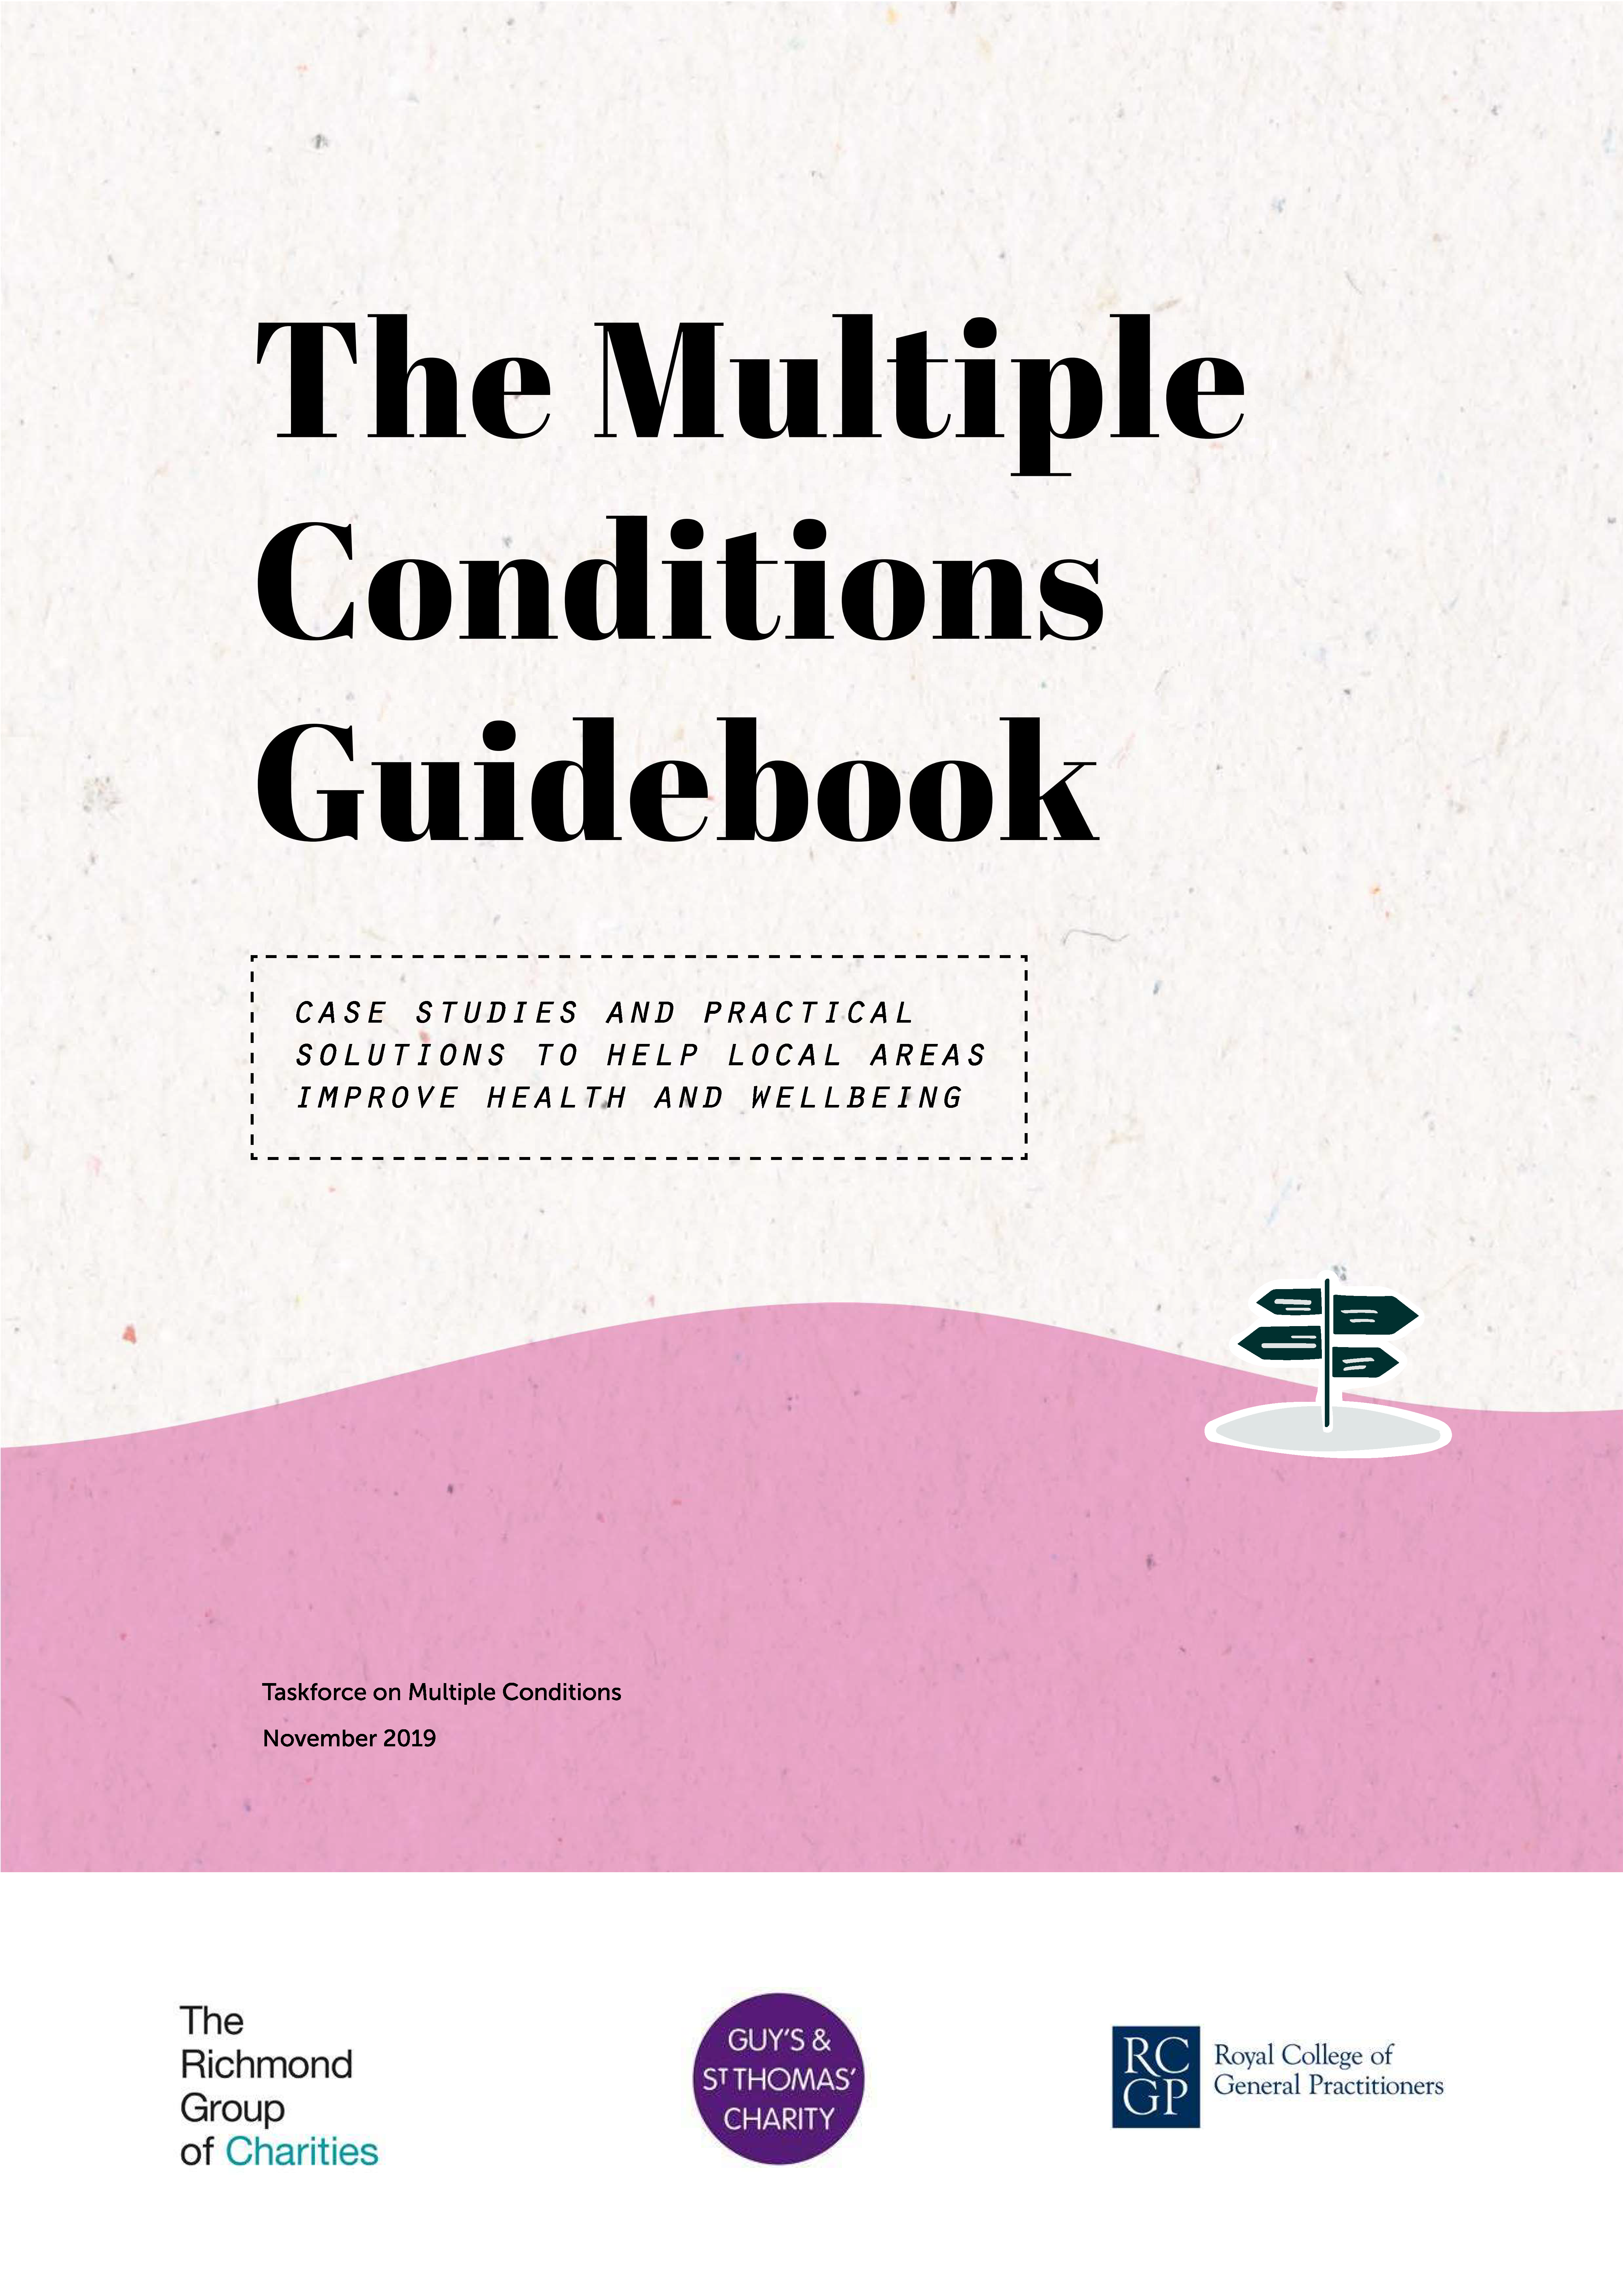 The Multiple Conditions Guidebook